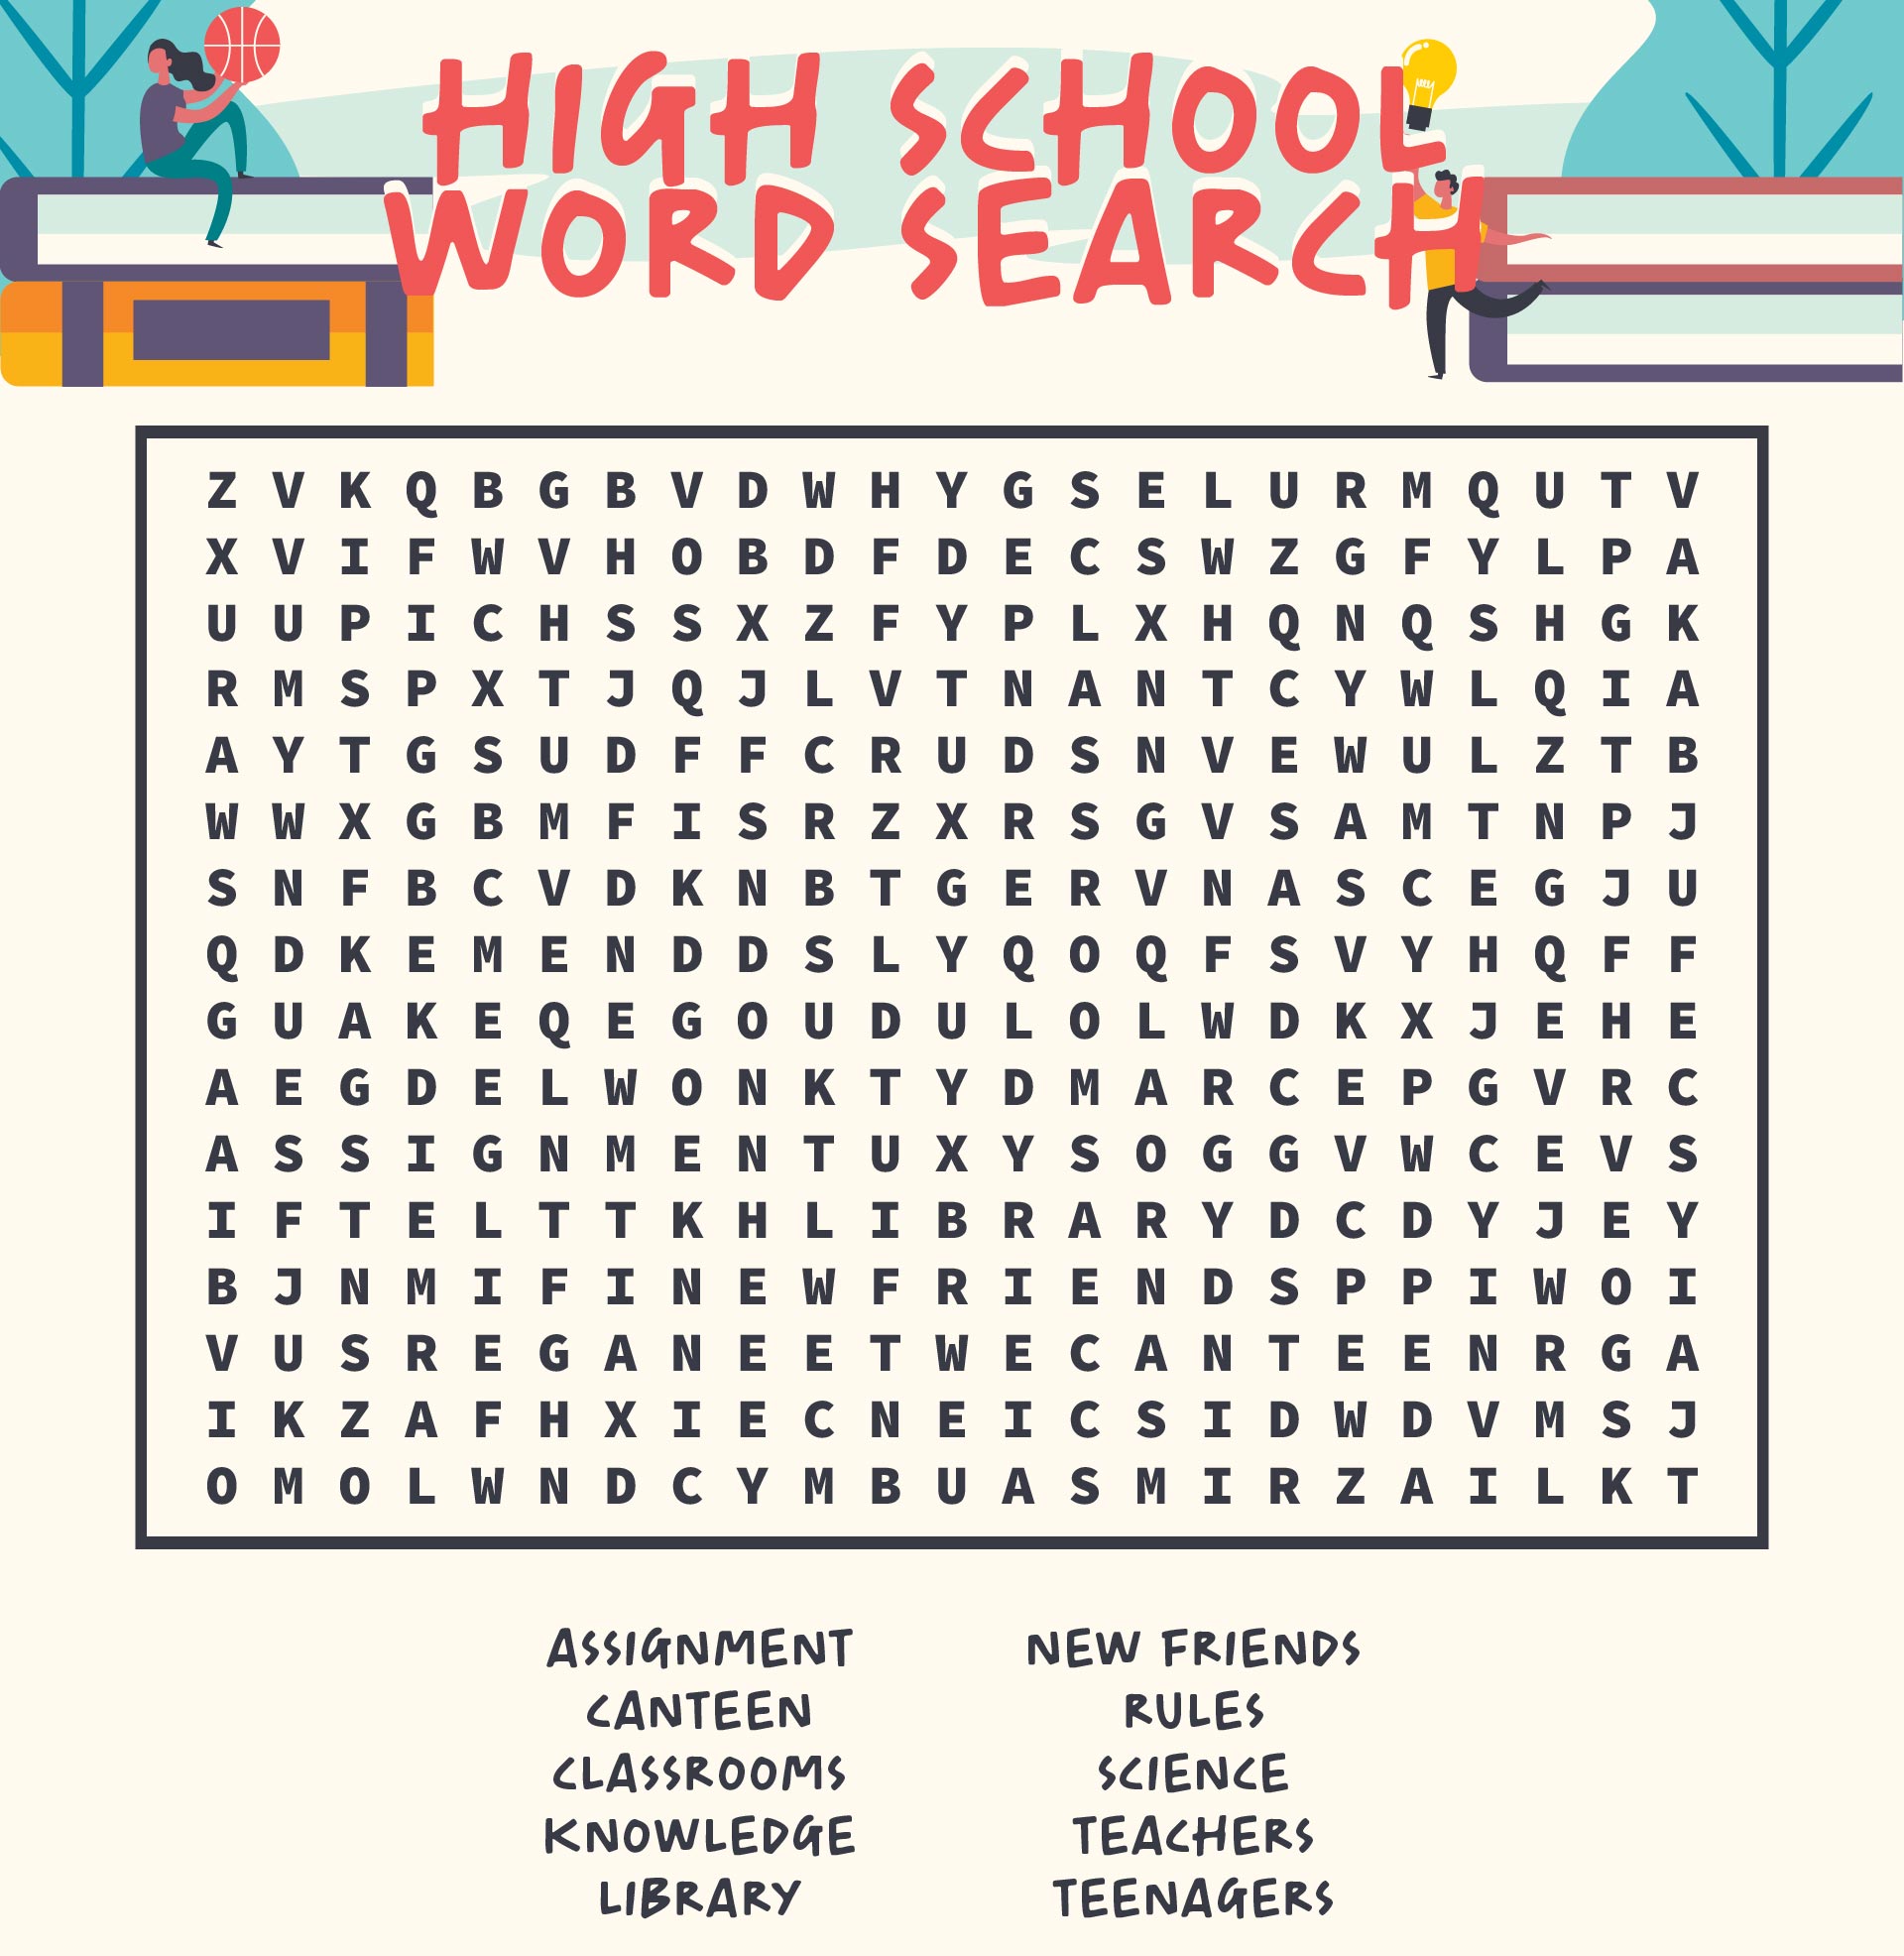 6-best-images-of-high-school-word-searches-printable-school-word